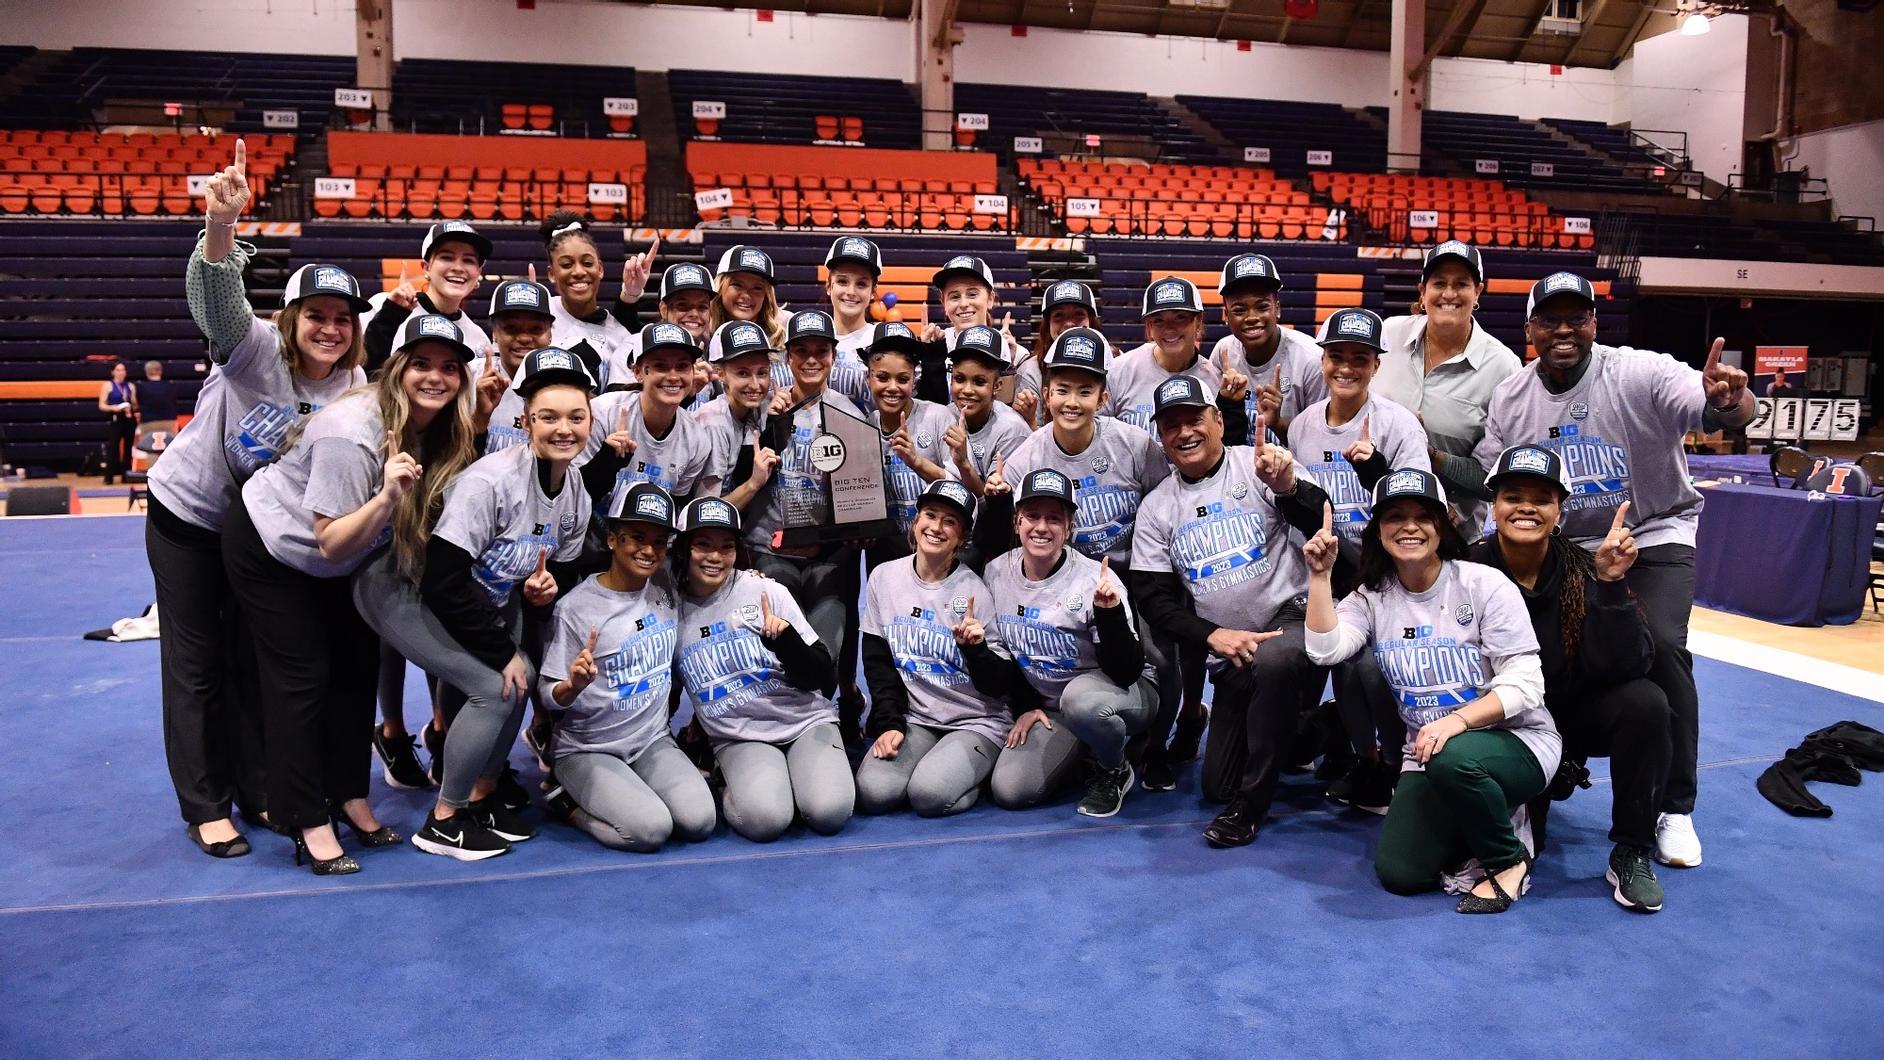 The Michigan State gymnastics team after being named Big Ten regular season co-champions with Michigan.